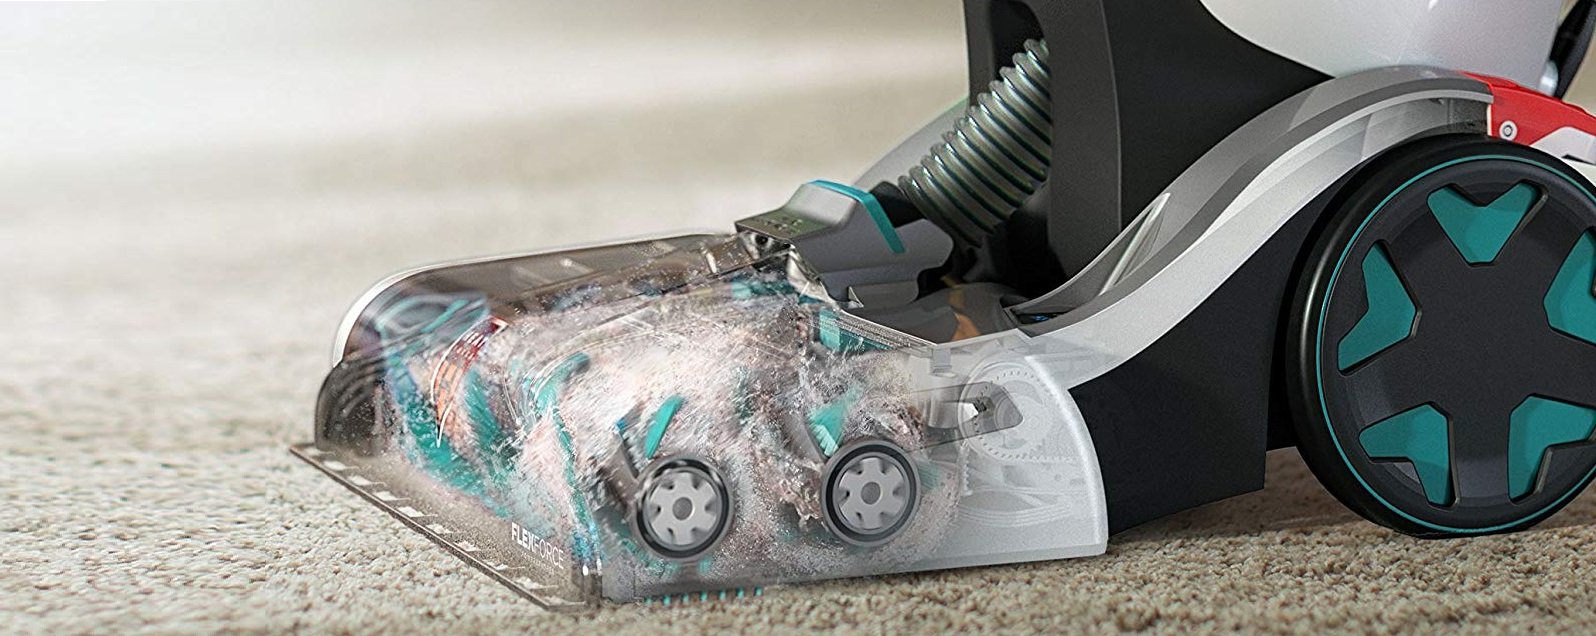 Best Carpet Cleaner Review